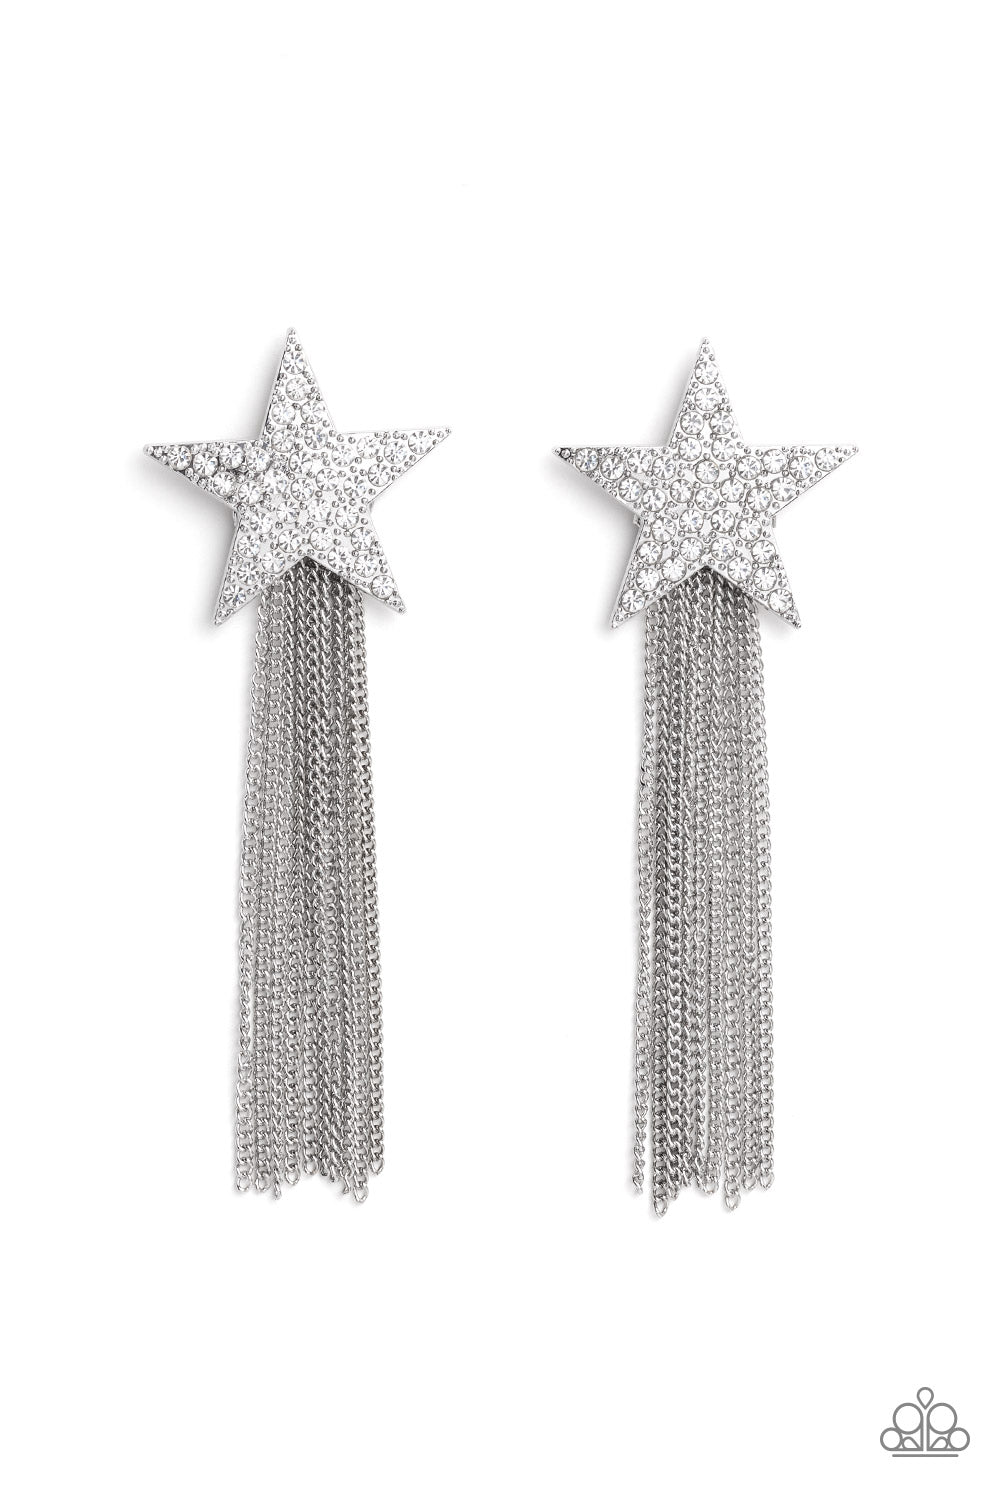 Paparazzi Accessories - Superstar Solo #E302 Peg - White Earrings Life of the Party December 2022